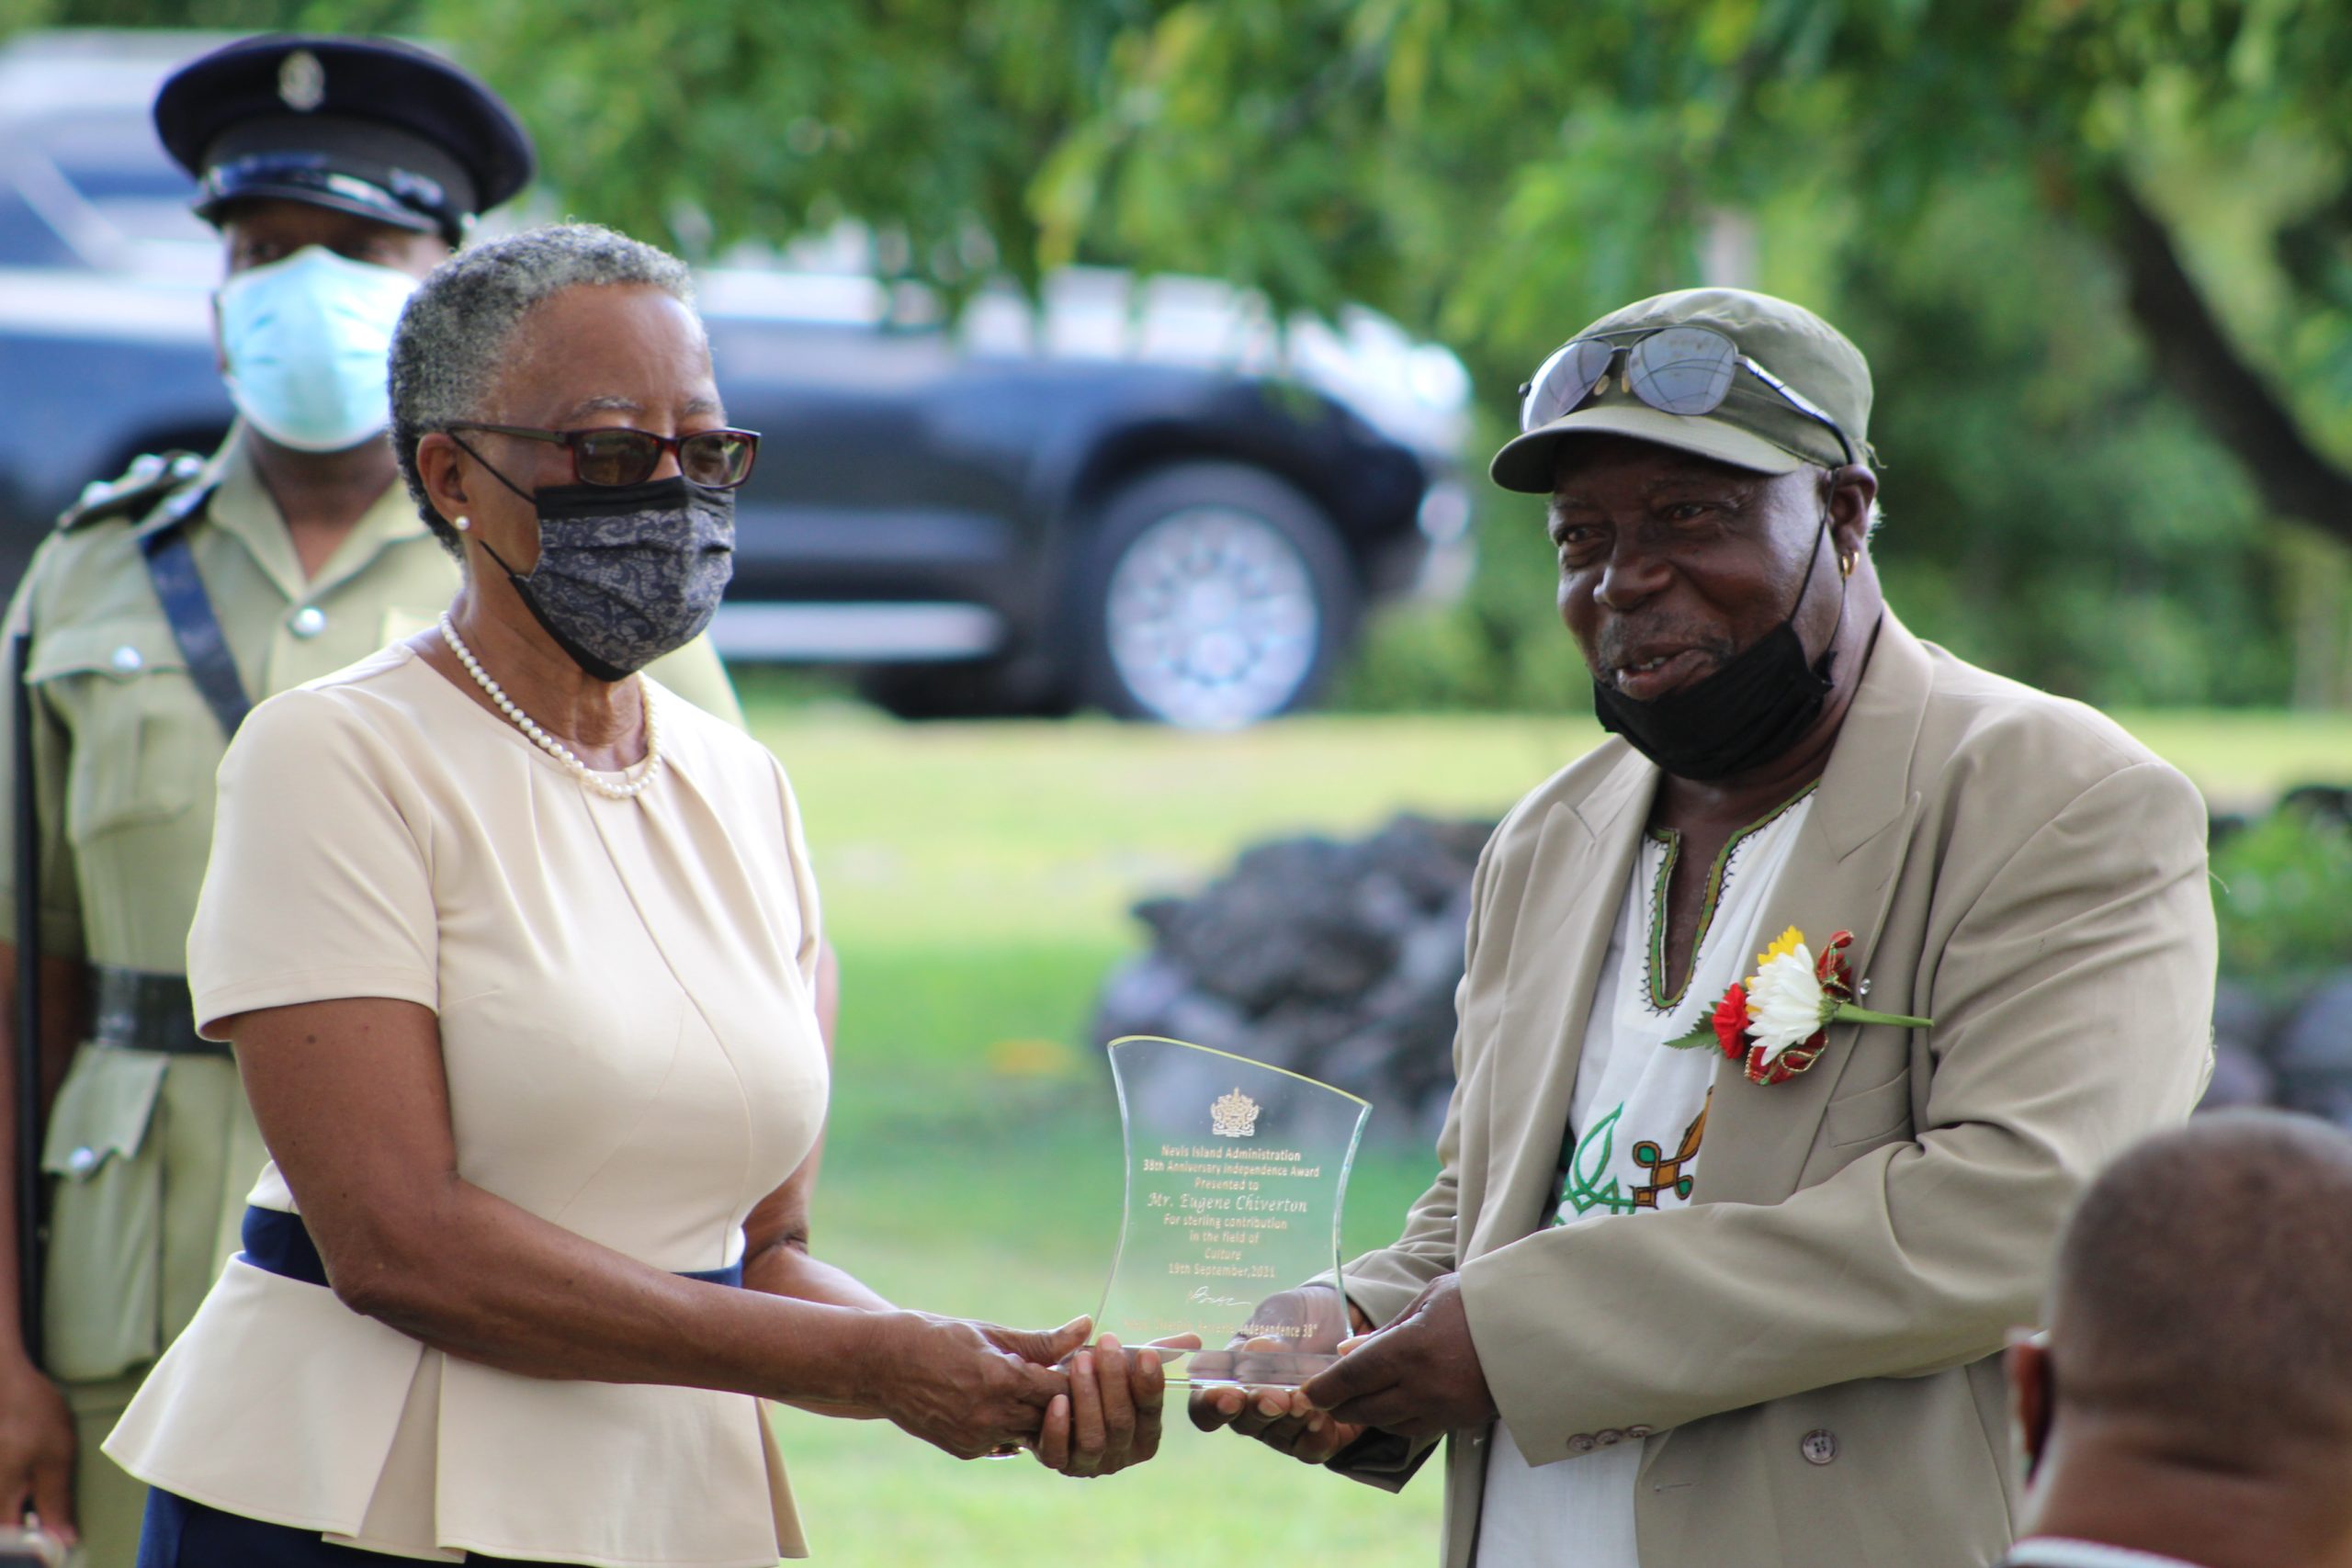 Mr. Eugene “Chevy” Chiverton of Brown Hill Village receiving a plaque in recognition of his contribution in the field of Culture from Her Honour Mrs. Hyleeta Liburd, Deputy Governor General in Nevis at an Awards Ceremony on September 20, 2021, at Government House on the occasion of the 38th Anniversary of Independence of St. Christopher and Nevis